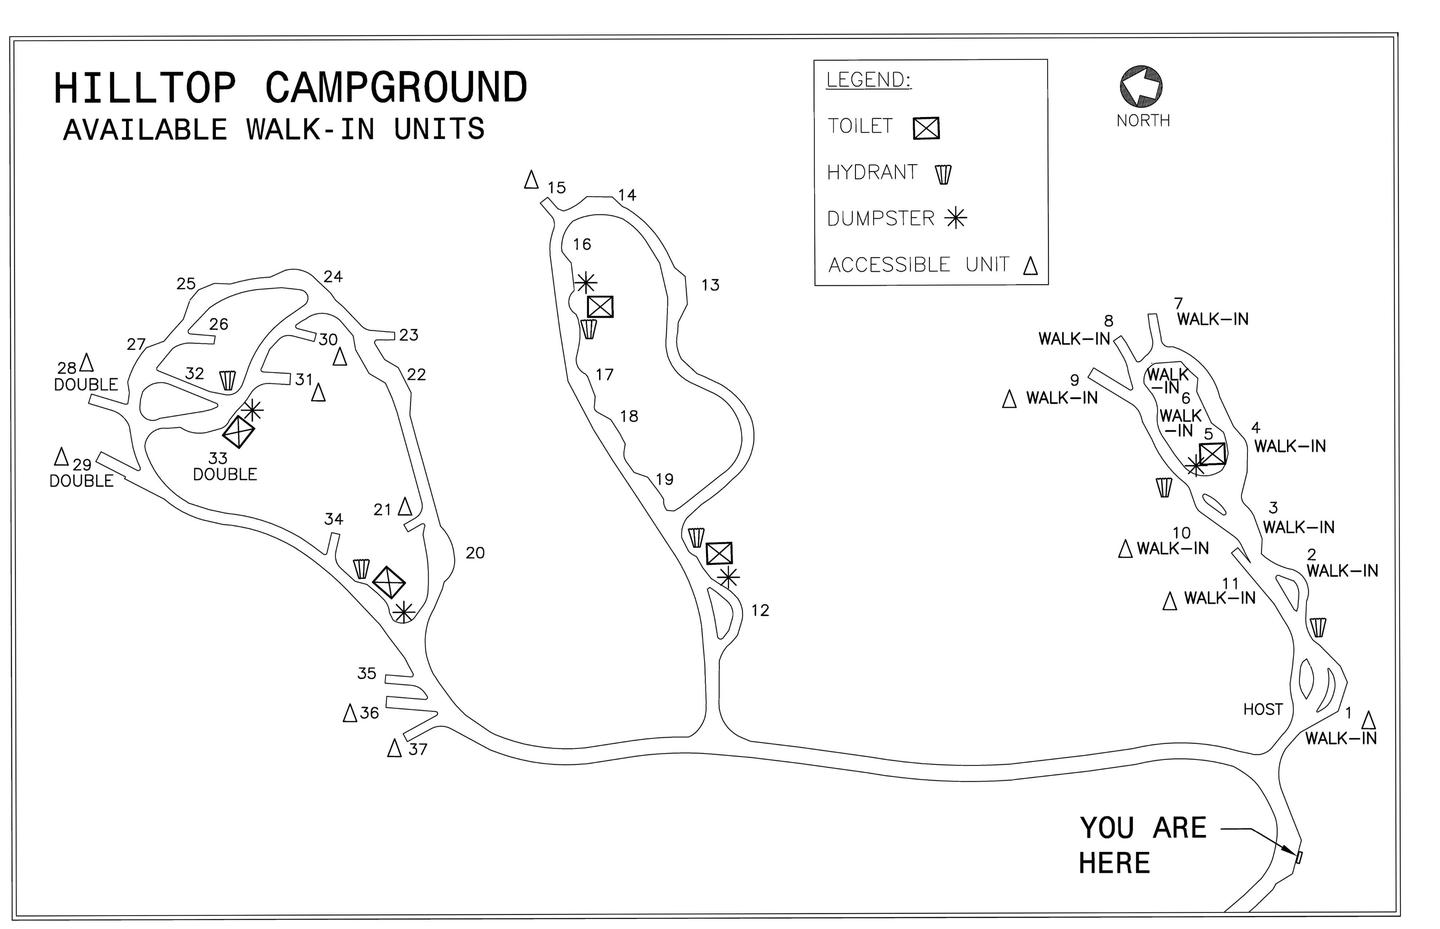 Hilltop Campground map showing accessible sites,walk-in units, dumpsters, toilets and hydrant locations.Hilltop Campground Walk-in and accessible unit map